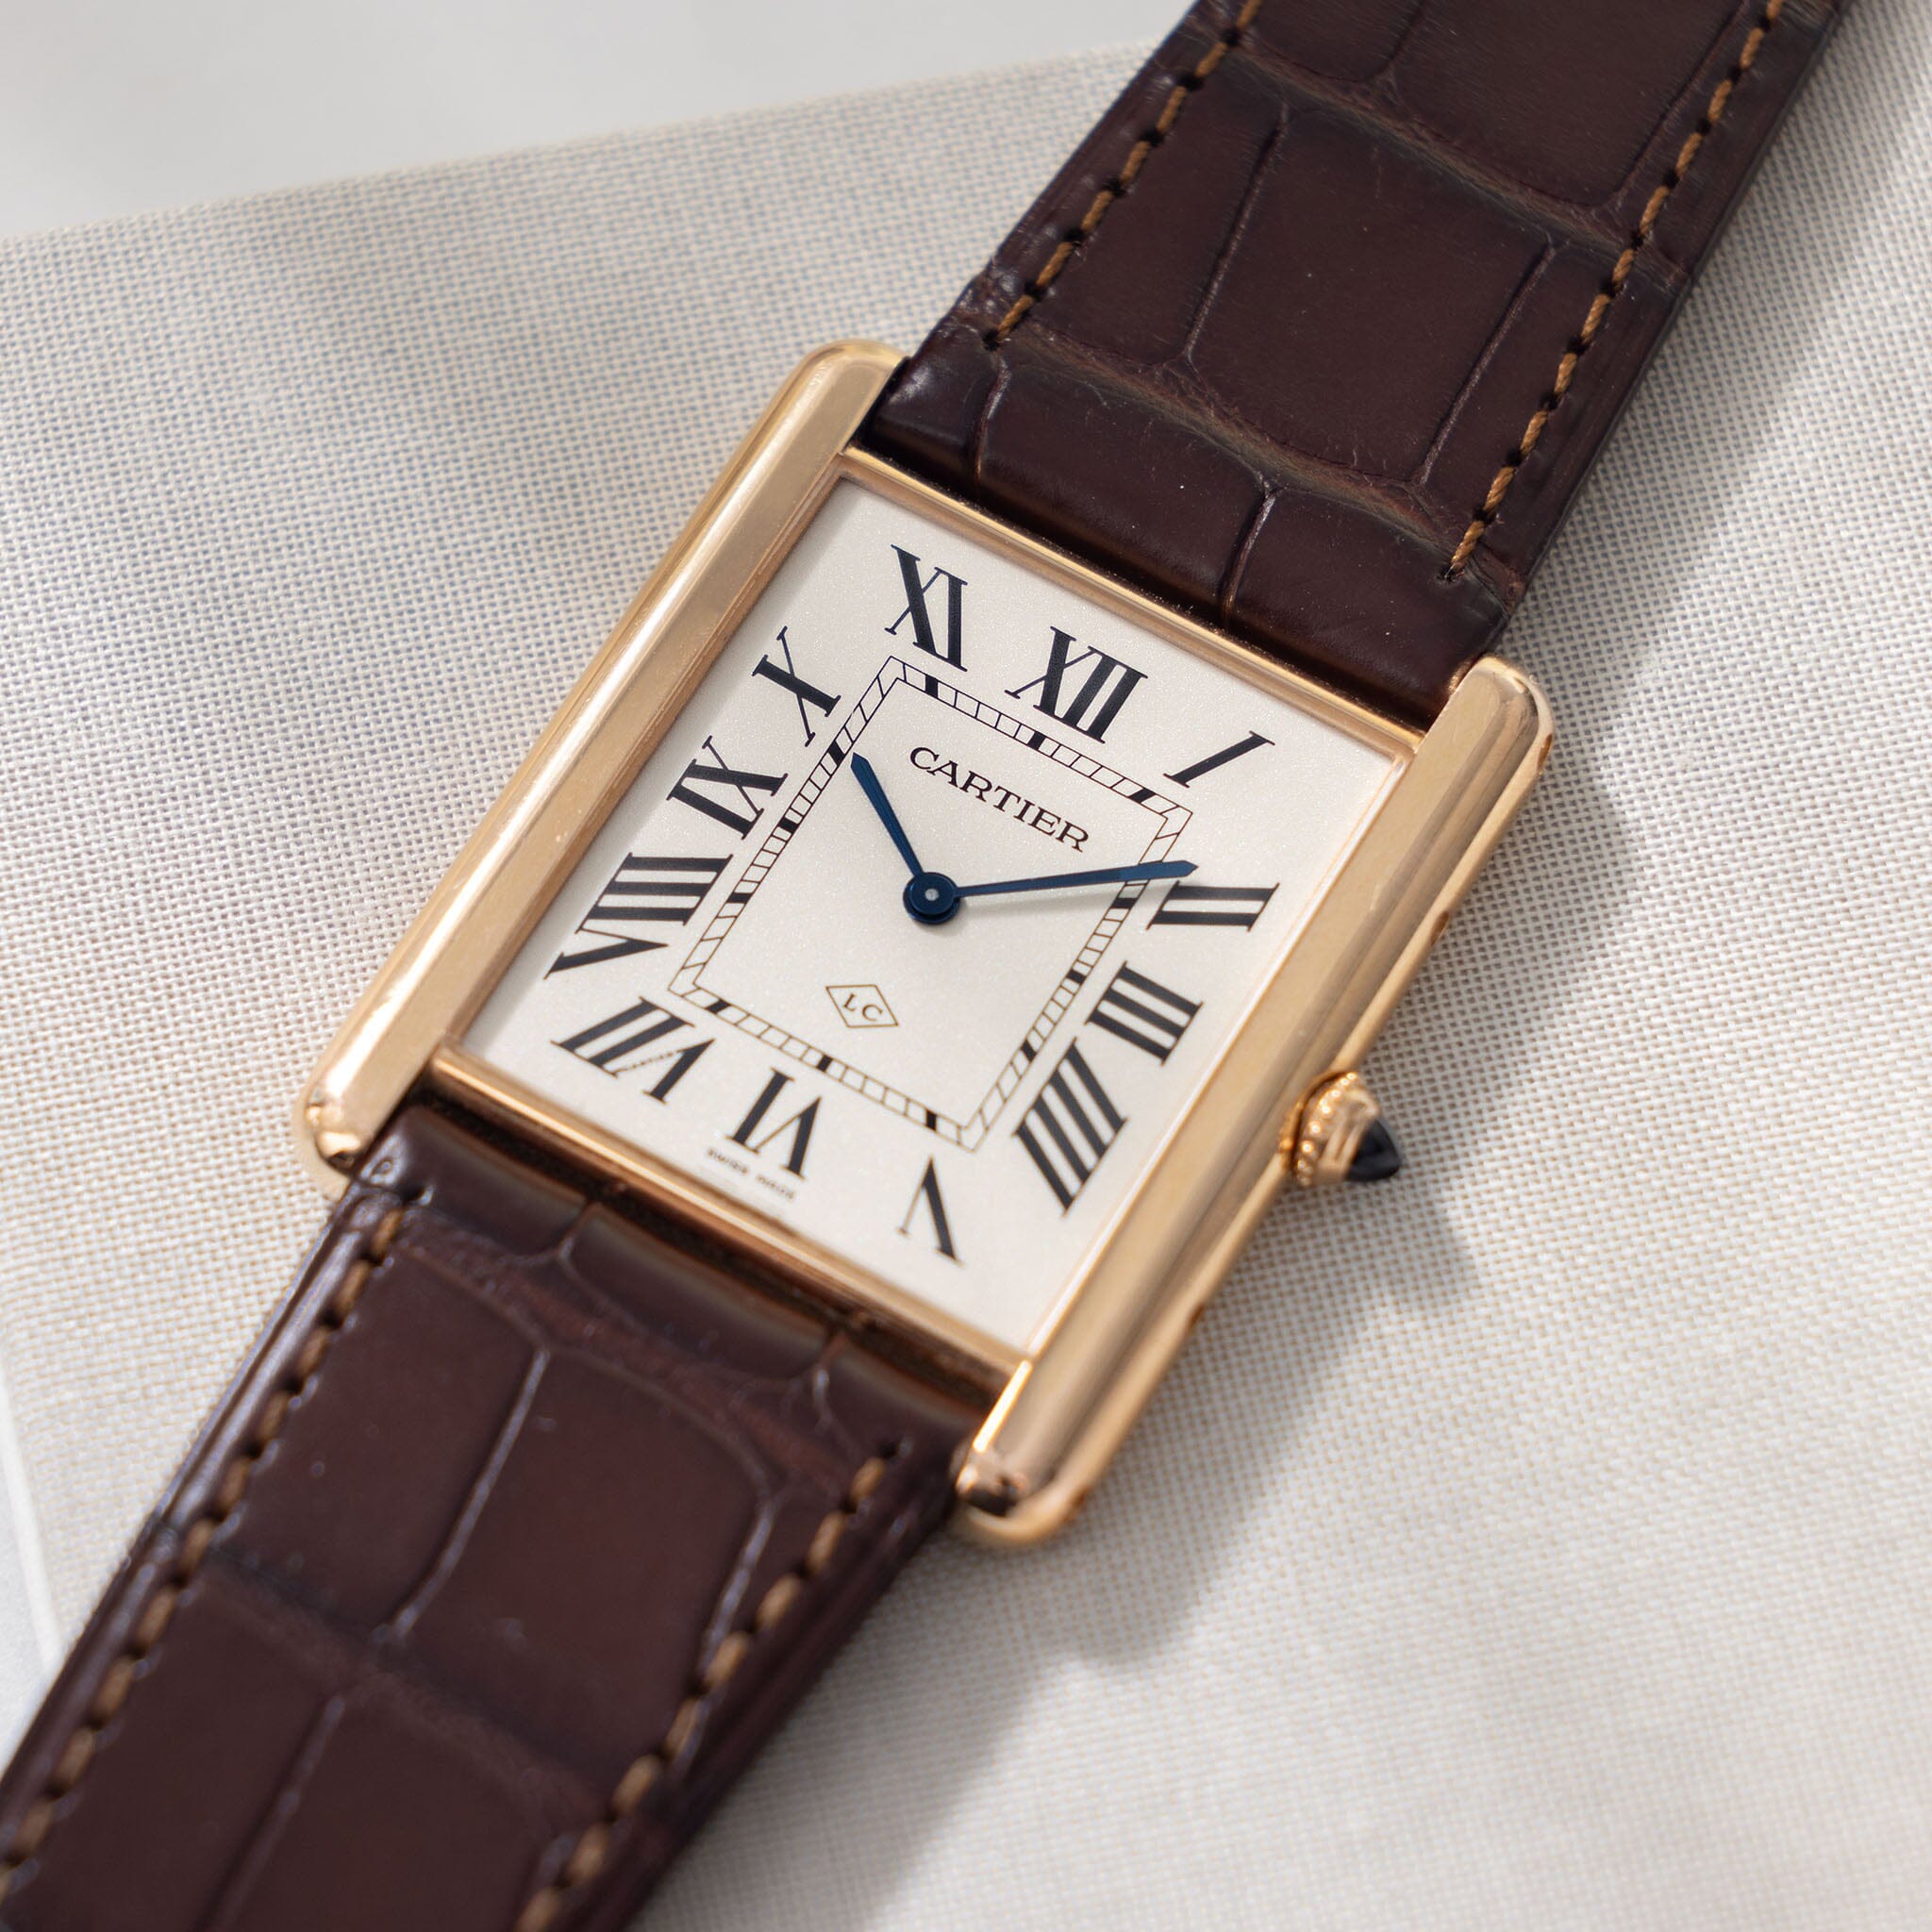 Cartier] Yellow Gold Tank Louis : r/Watches